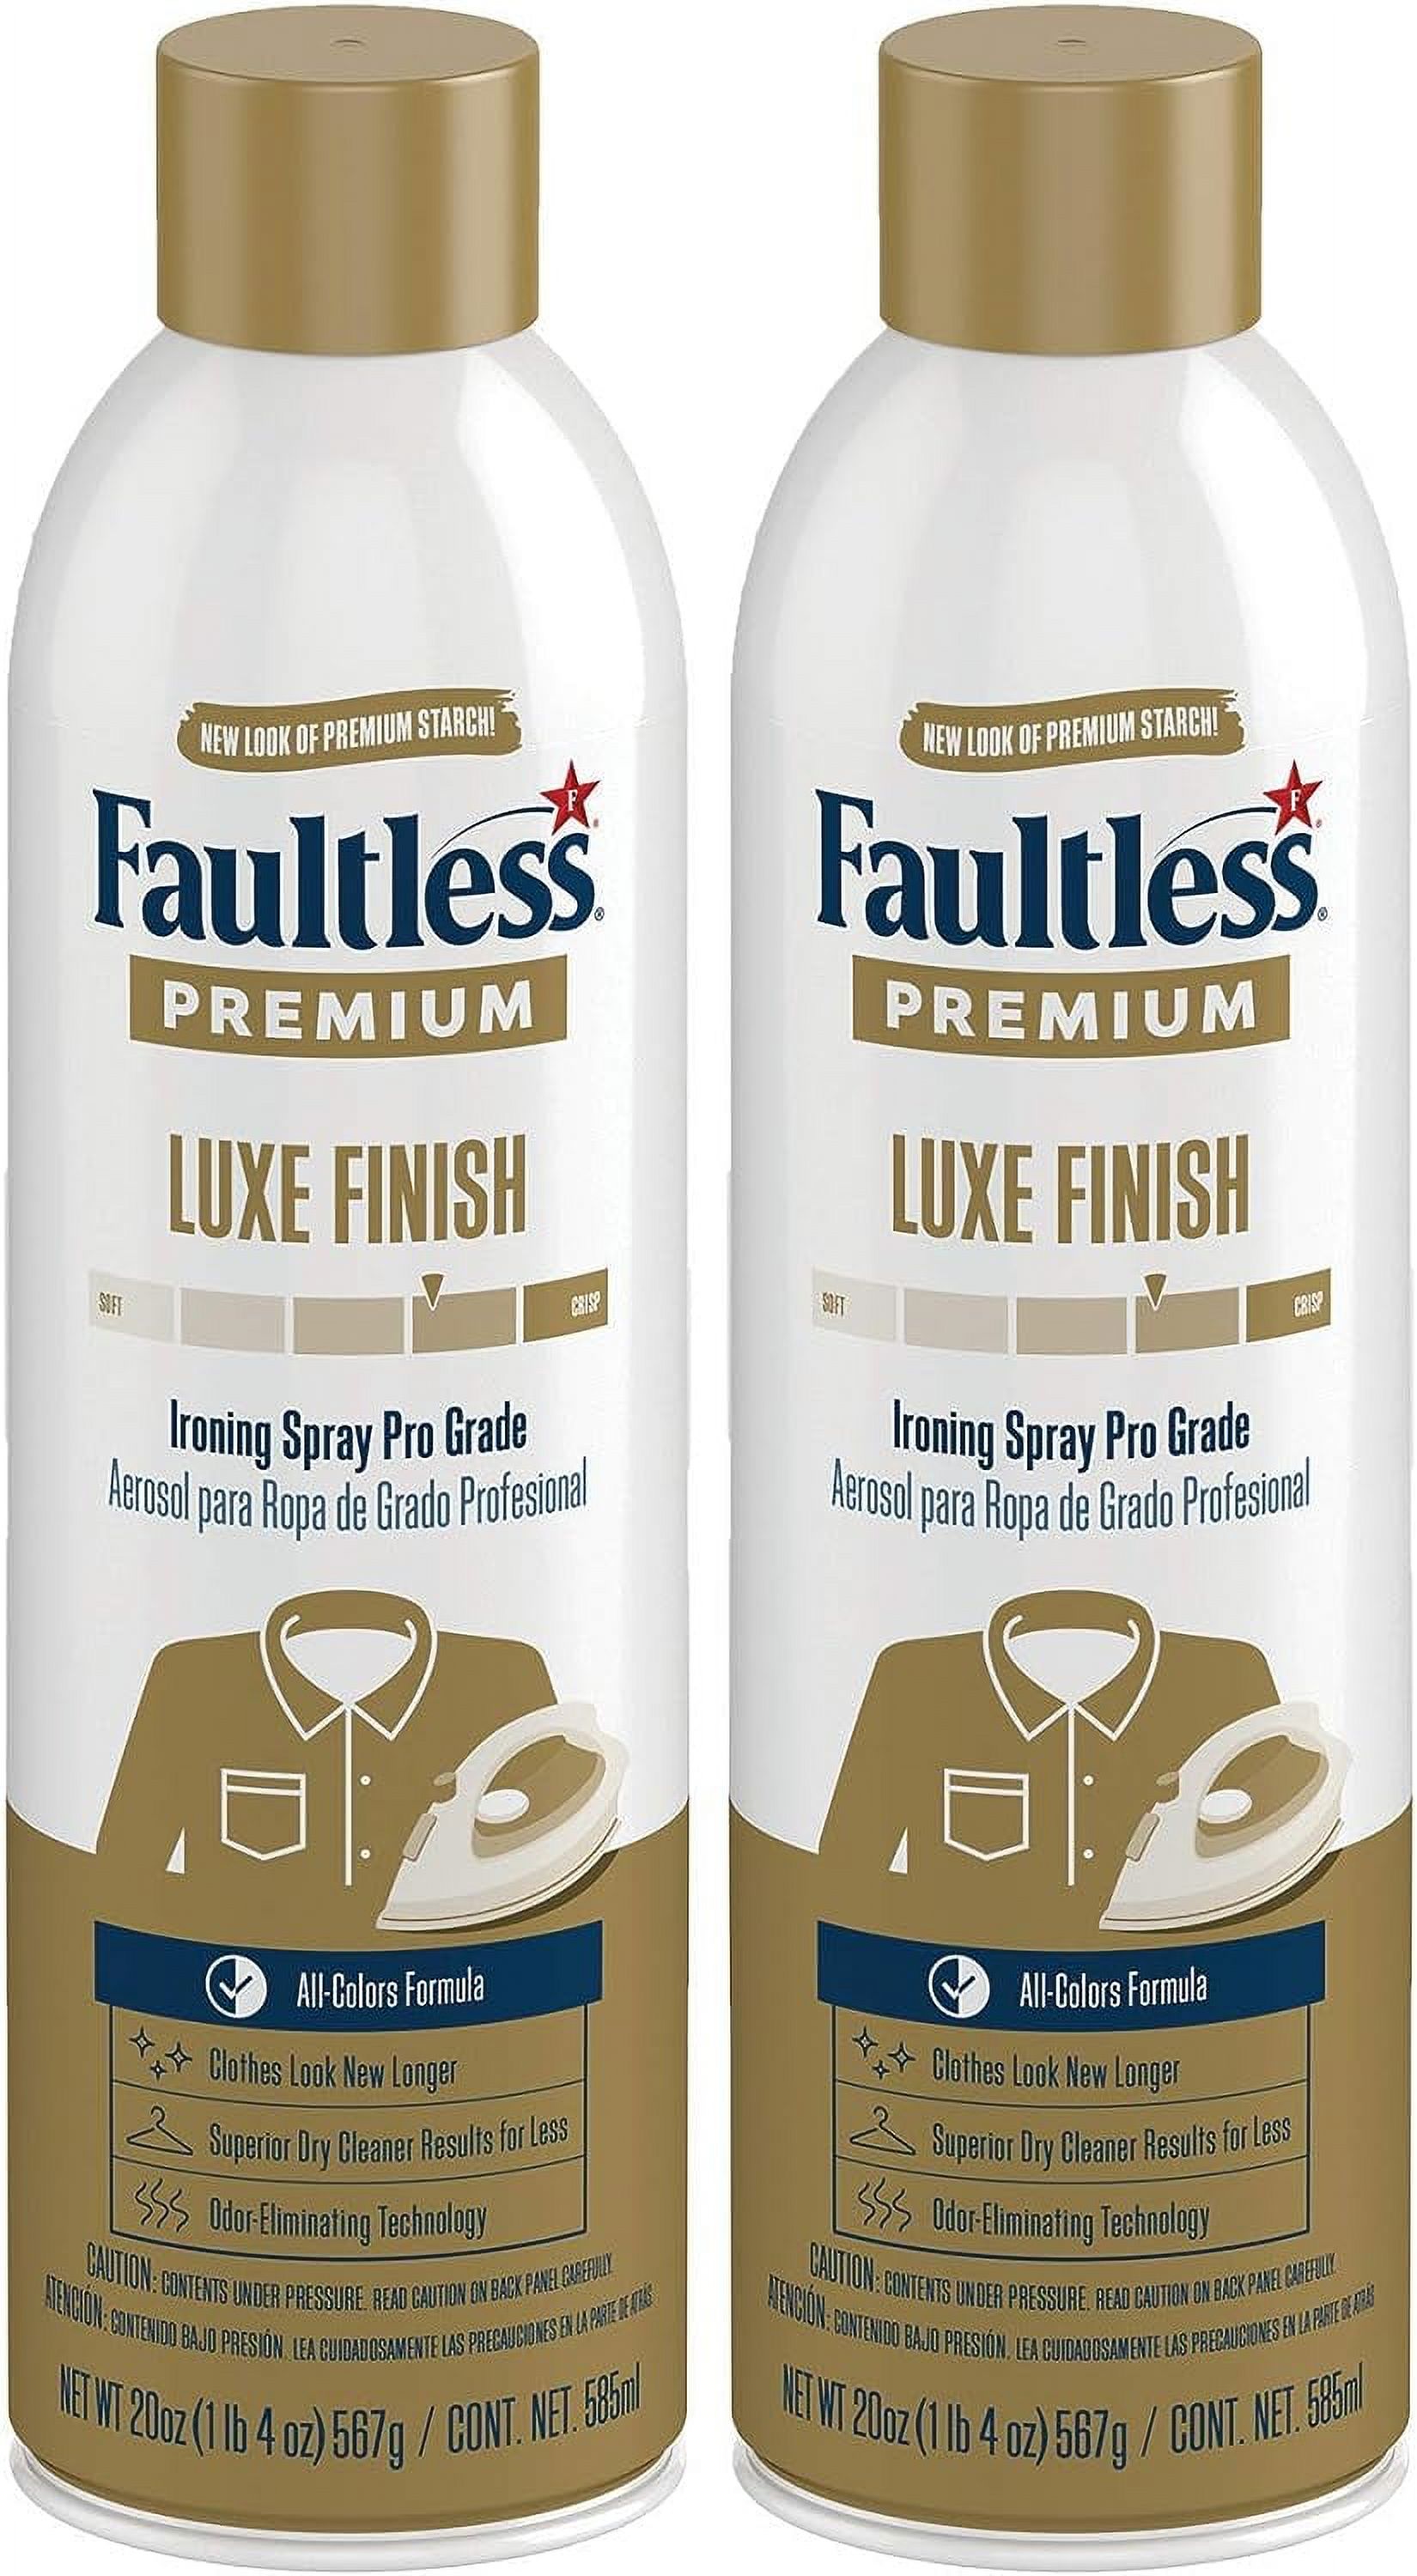 Faultless Ironing Spray, Premium, Luxe Finish, Pro Grade, 20 oz (Pack of 2)